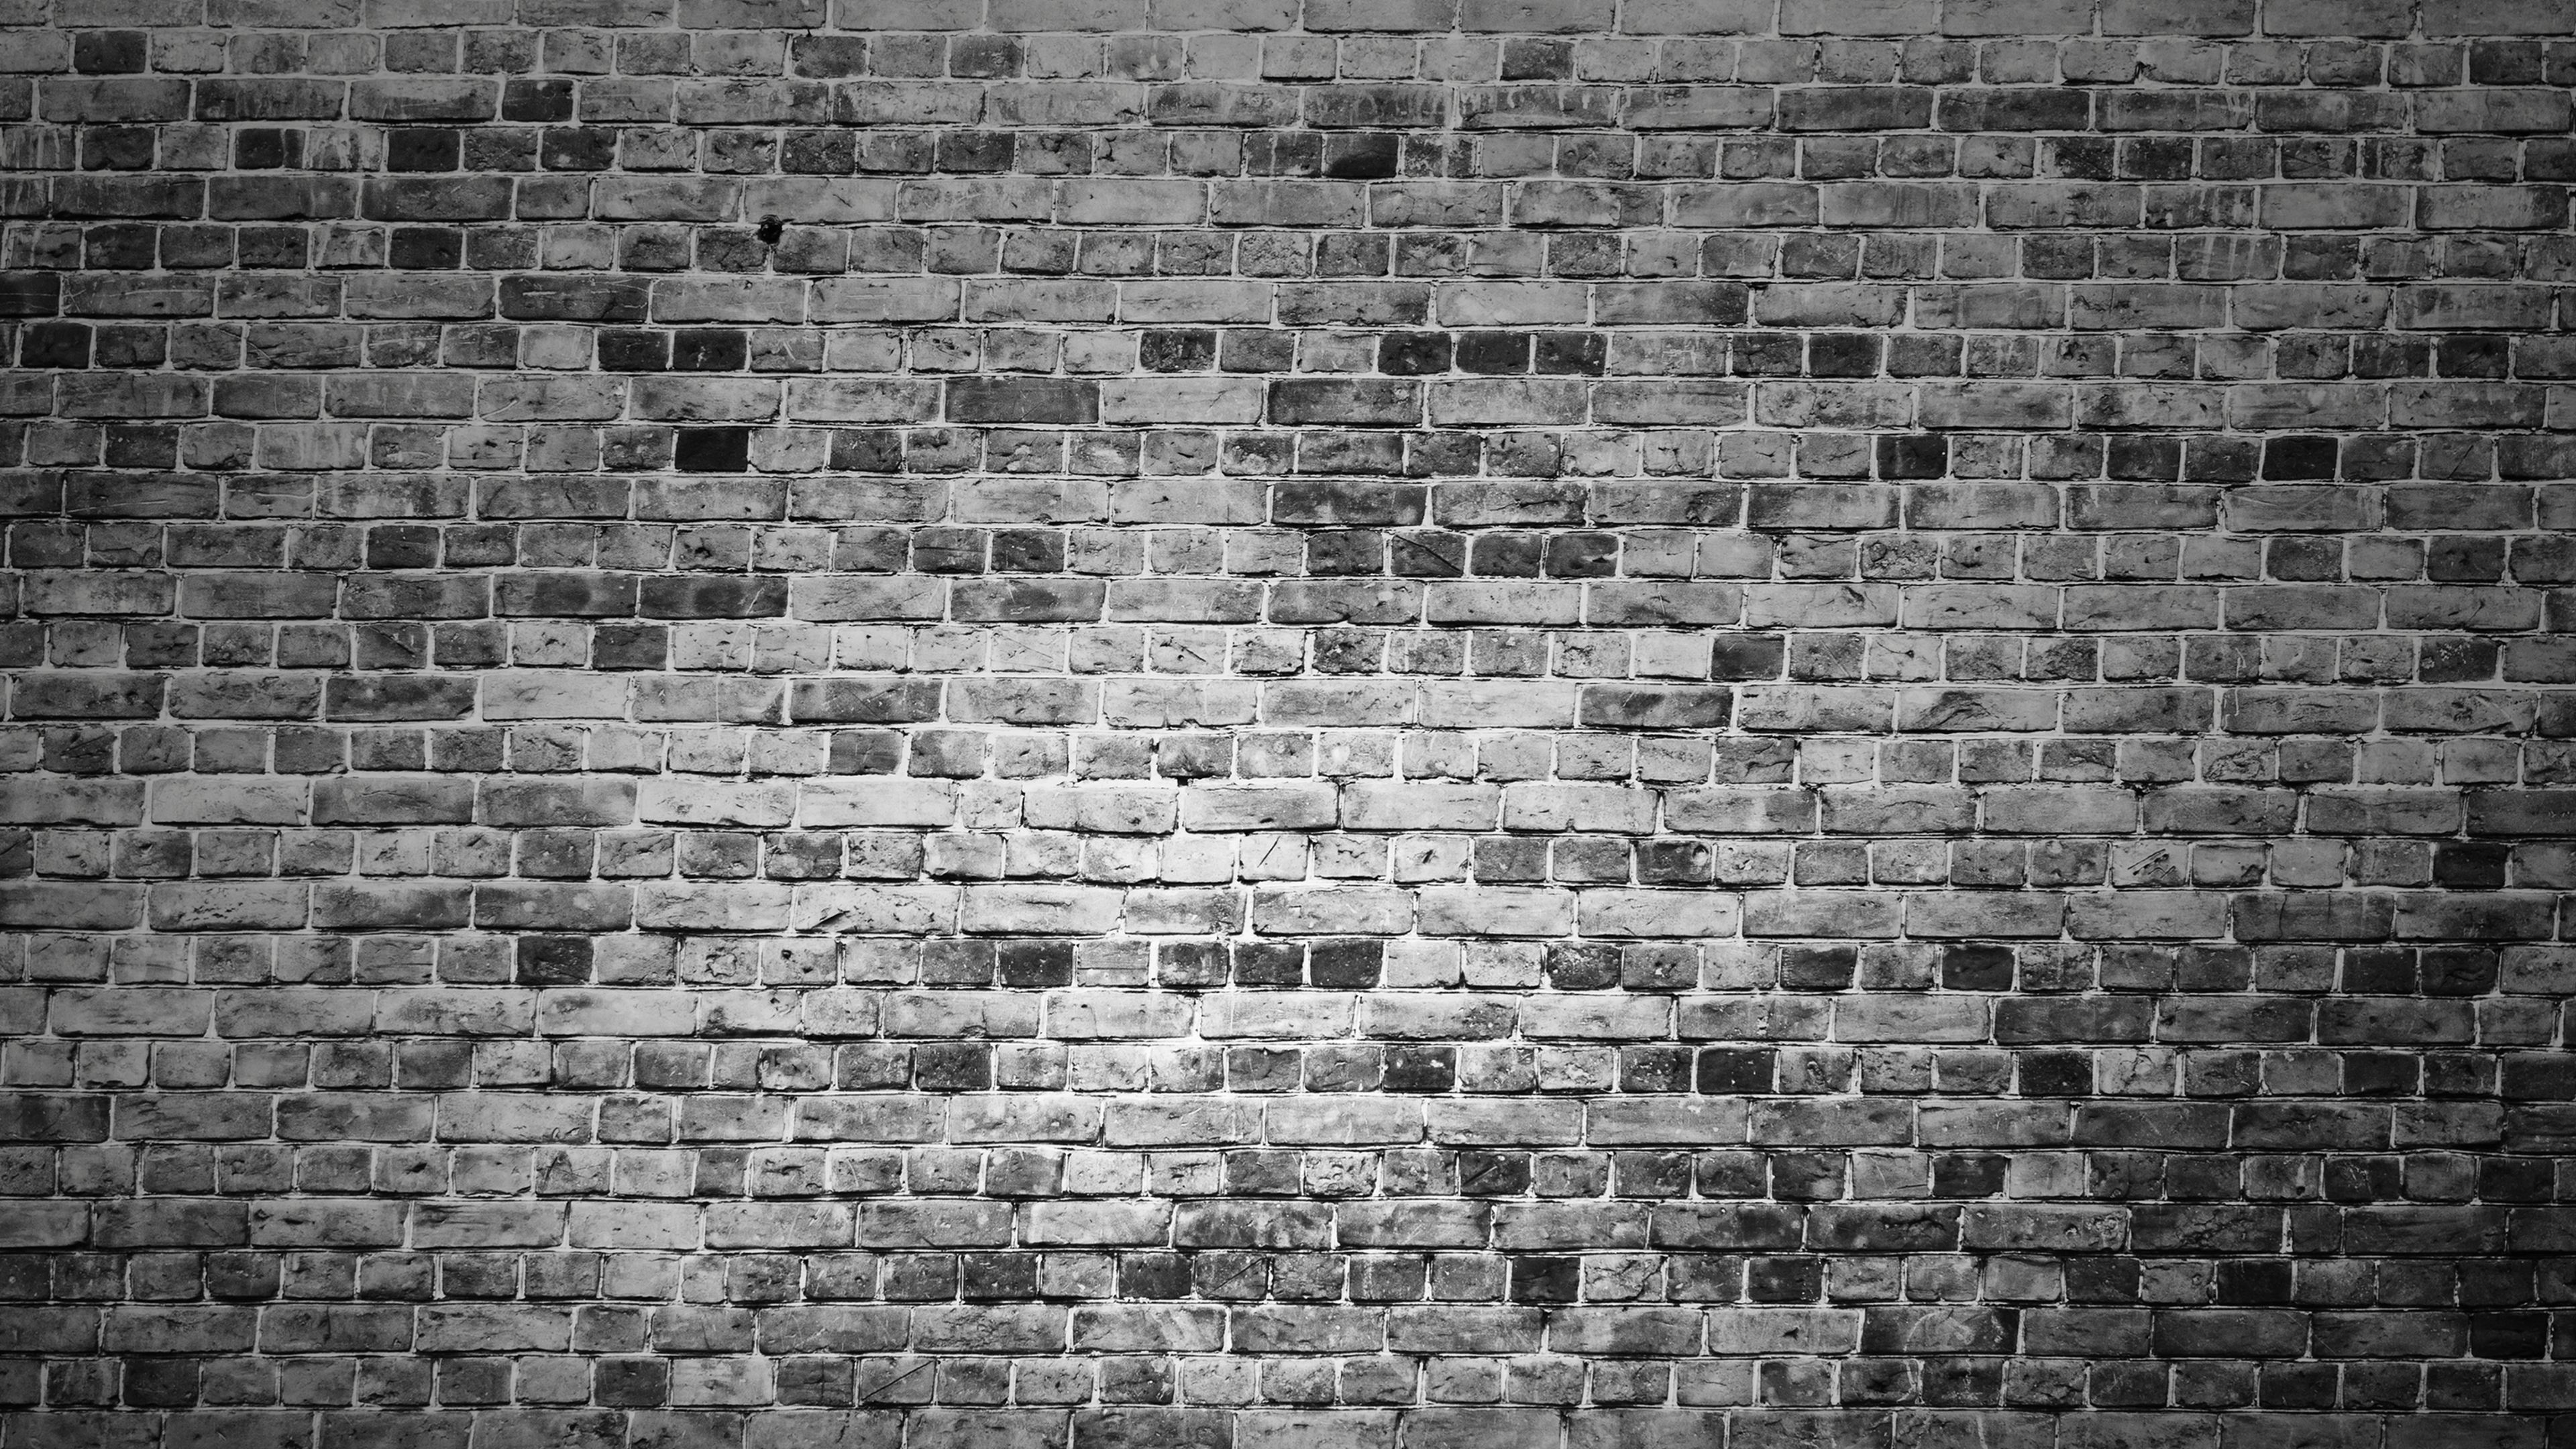 Download 3840x2160 wallpaper brick wall, black and white